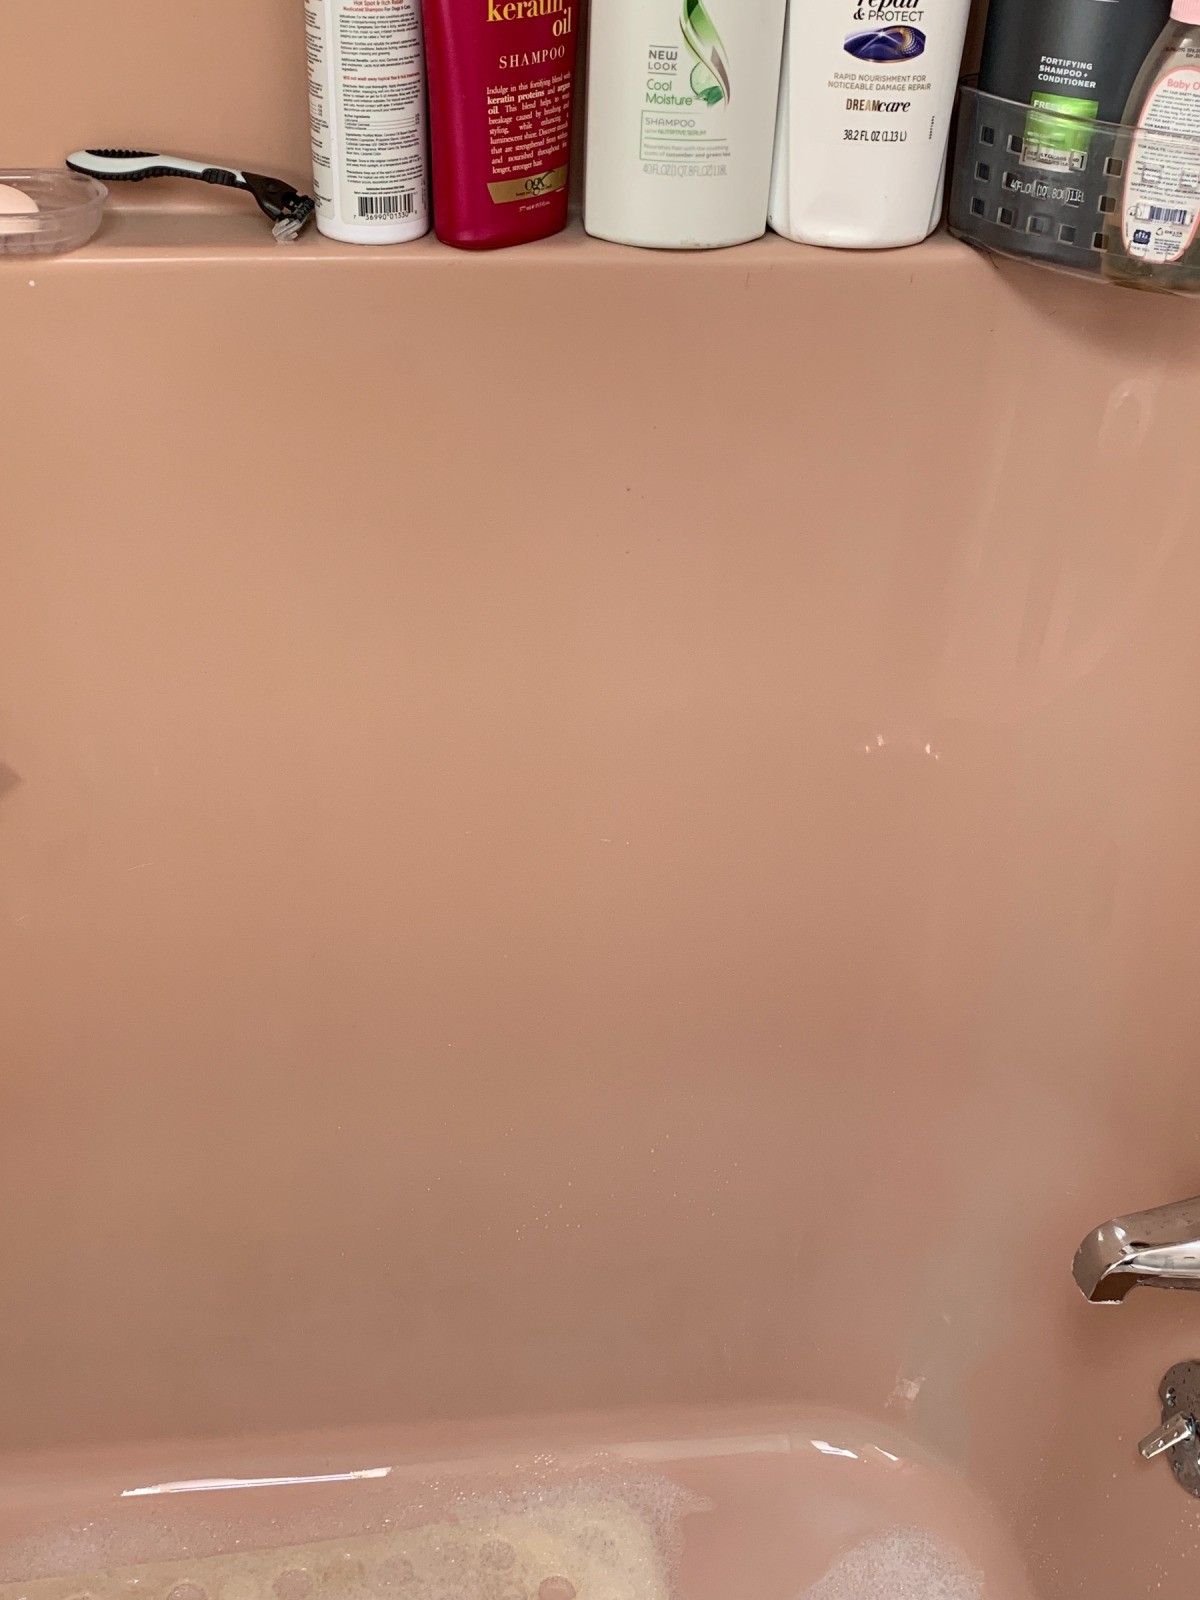 Removing A Discoloration On My Bathtub, How To Clean Discolored Bathtub